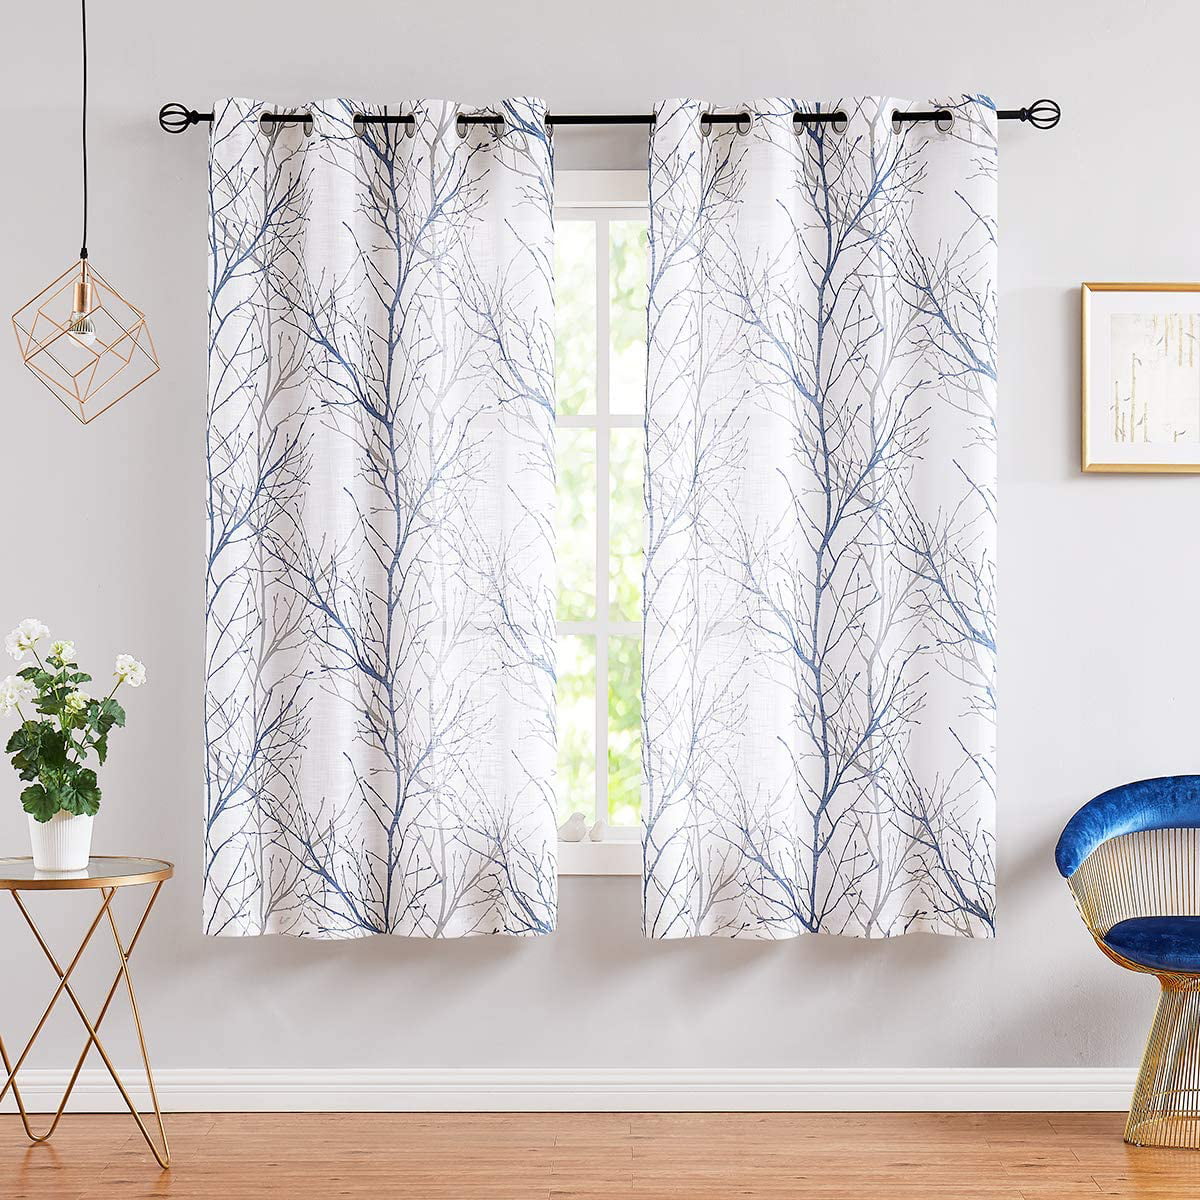 Green Sheer White Curtains for Living Room 72 Length Grey Tree Branches Print Curtain Set Linen Textured Semi-Sheer Window Drapes for Bedroom Grommet Top 2 Panels